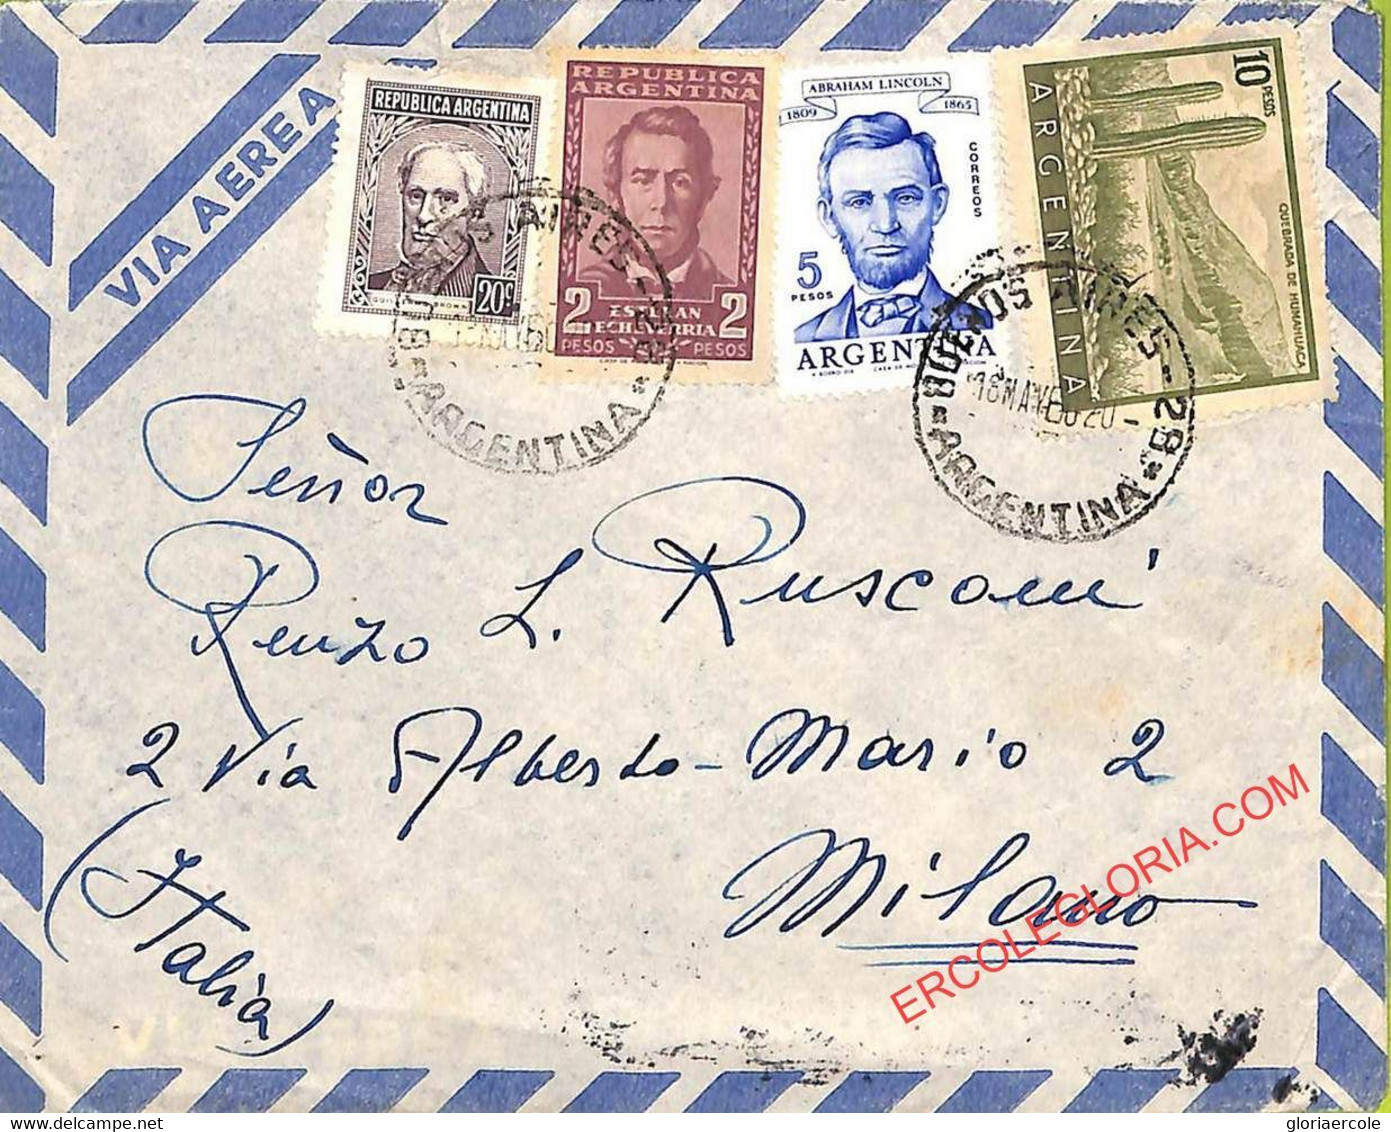 Ad6088 - ARGENTINA - POSTAL HISTORY - AIRMAIL COVER To ITALY 1960 Cacti - Covers & Documents